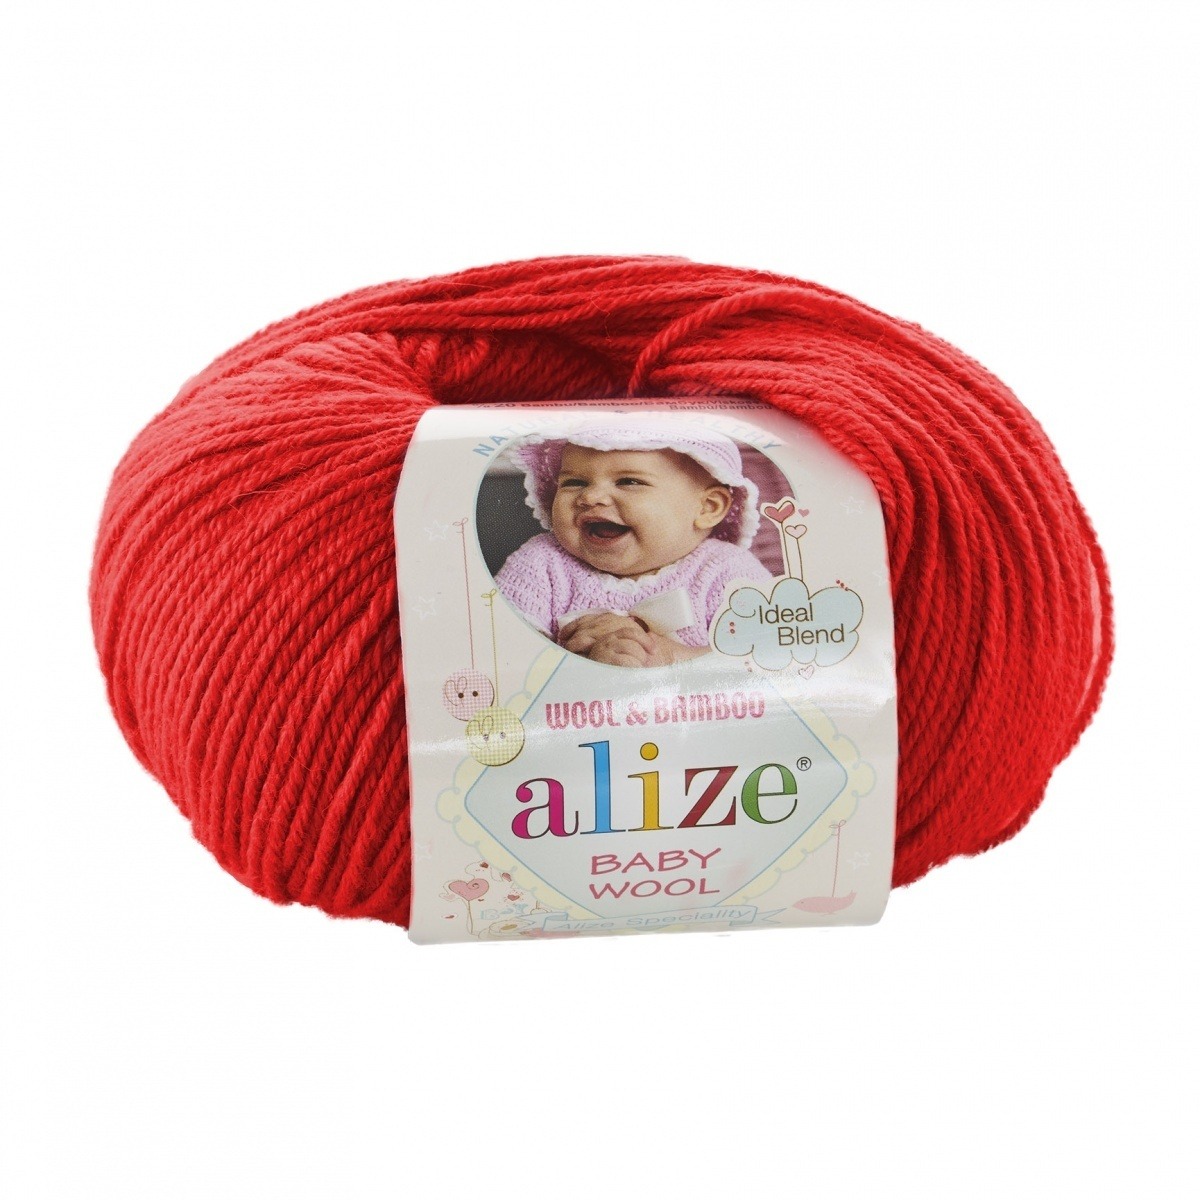 Alize "Baby wool" (56)